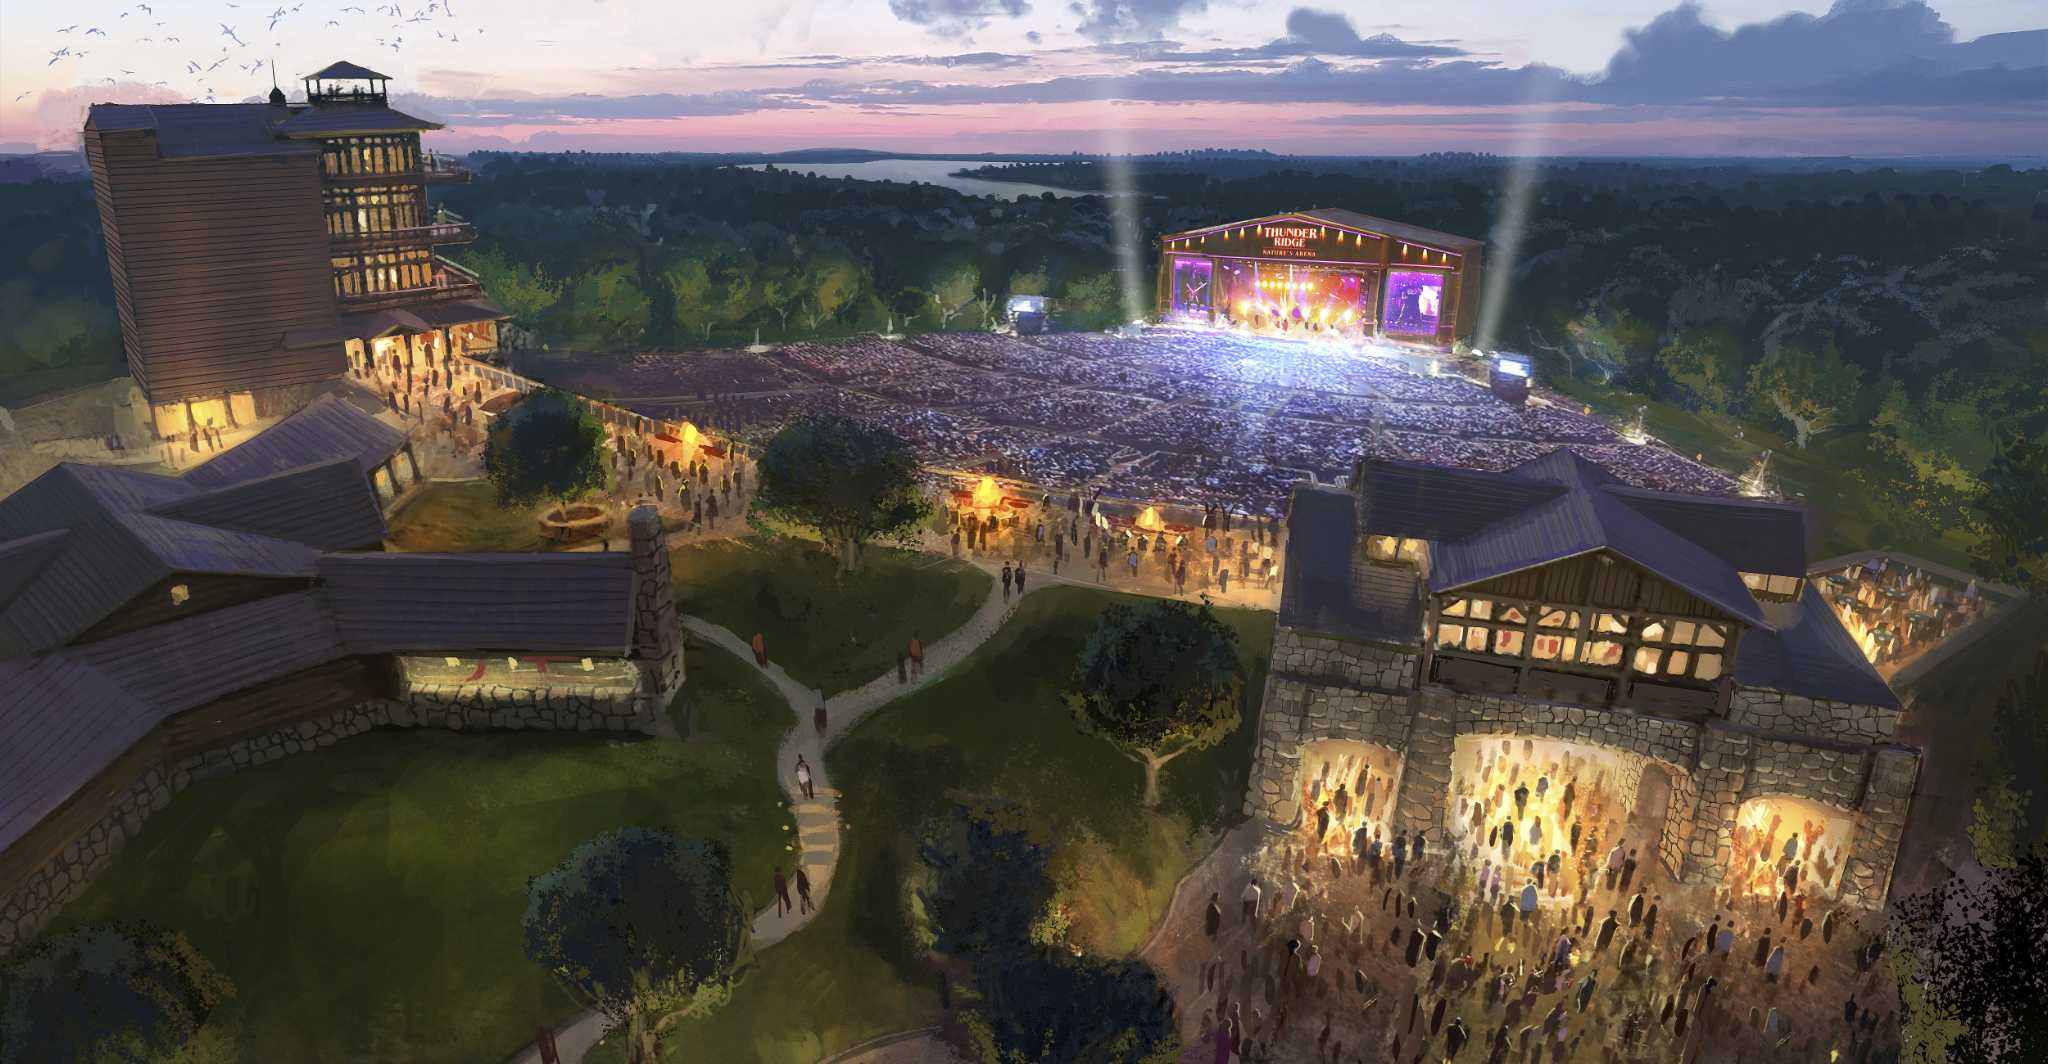 Rolling Stones to swing through new Thunder Ridge Nature Arena in the Ozarks